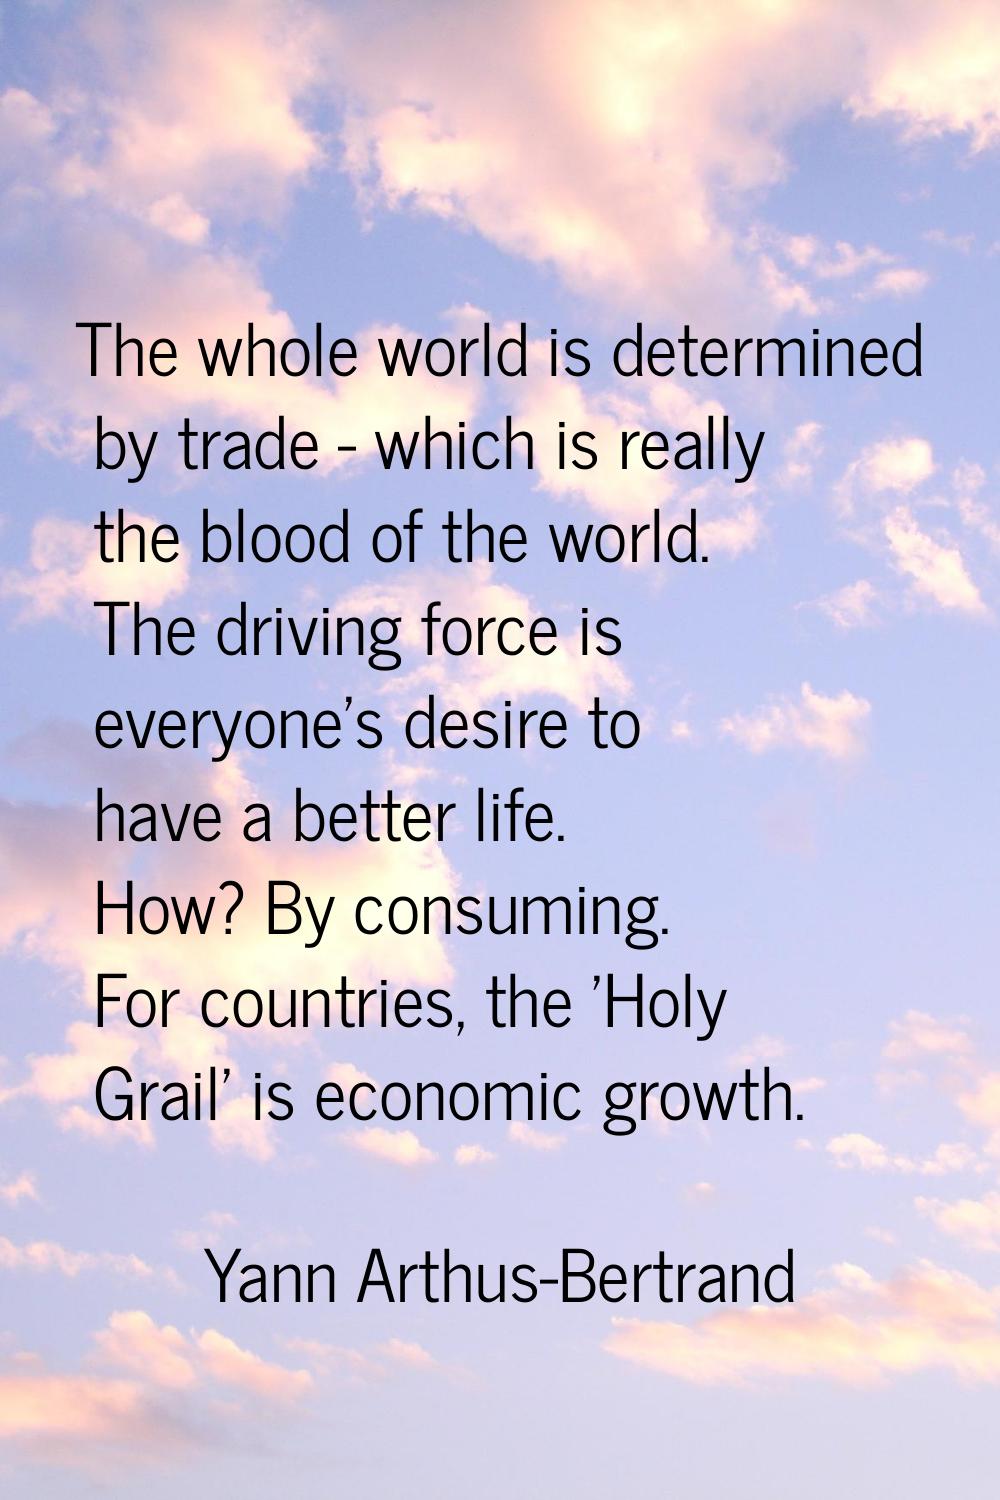 The whole world is determined by trade - which is really the blood of the world. The driving force 